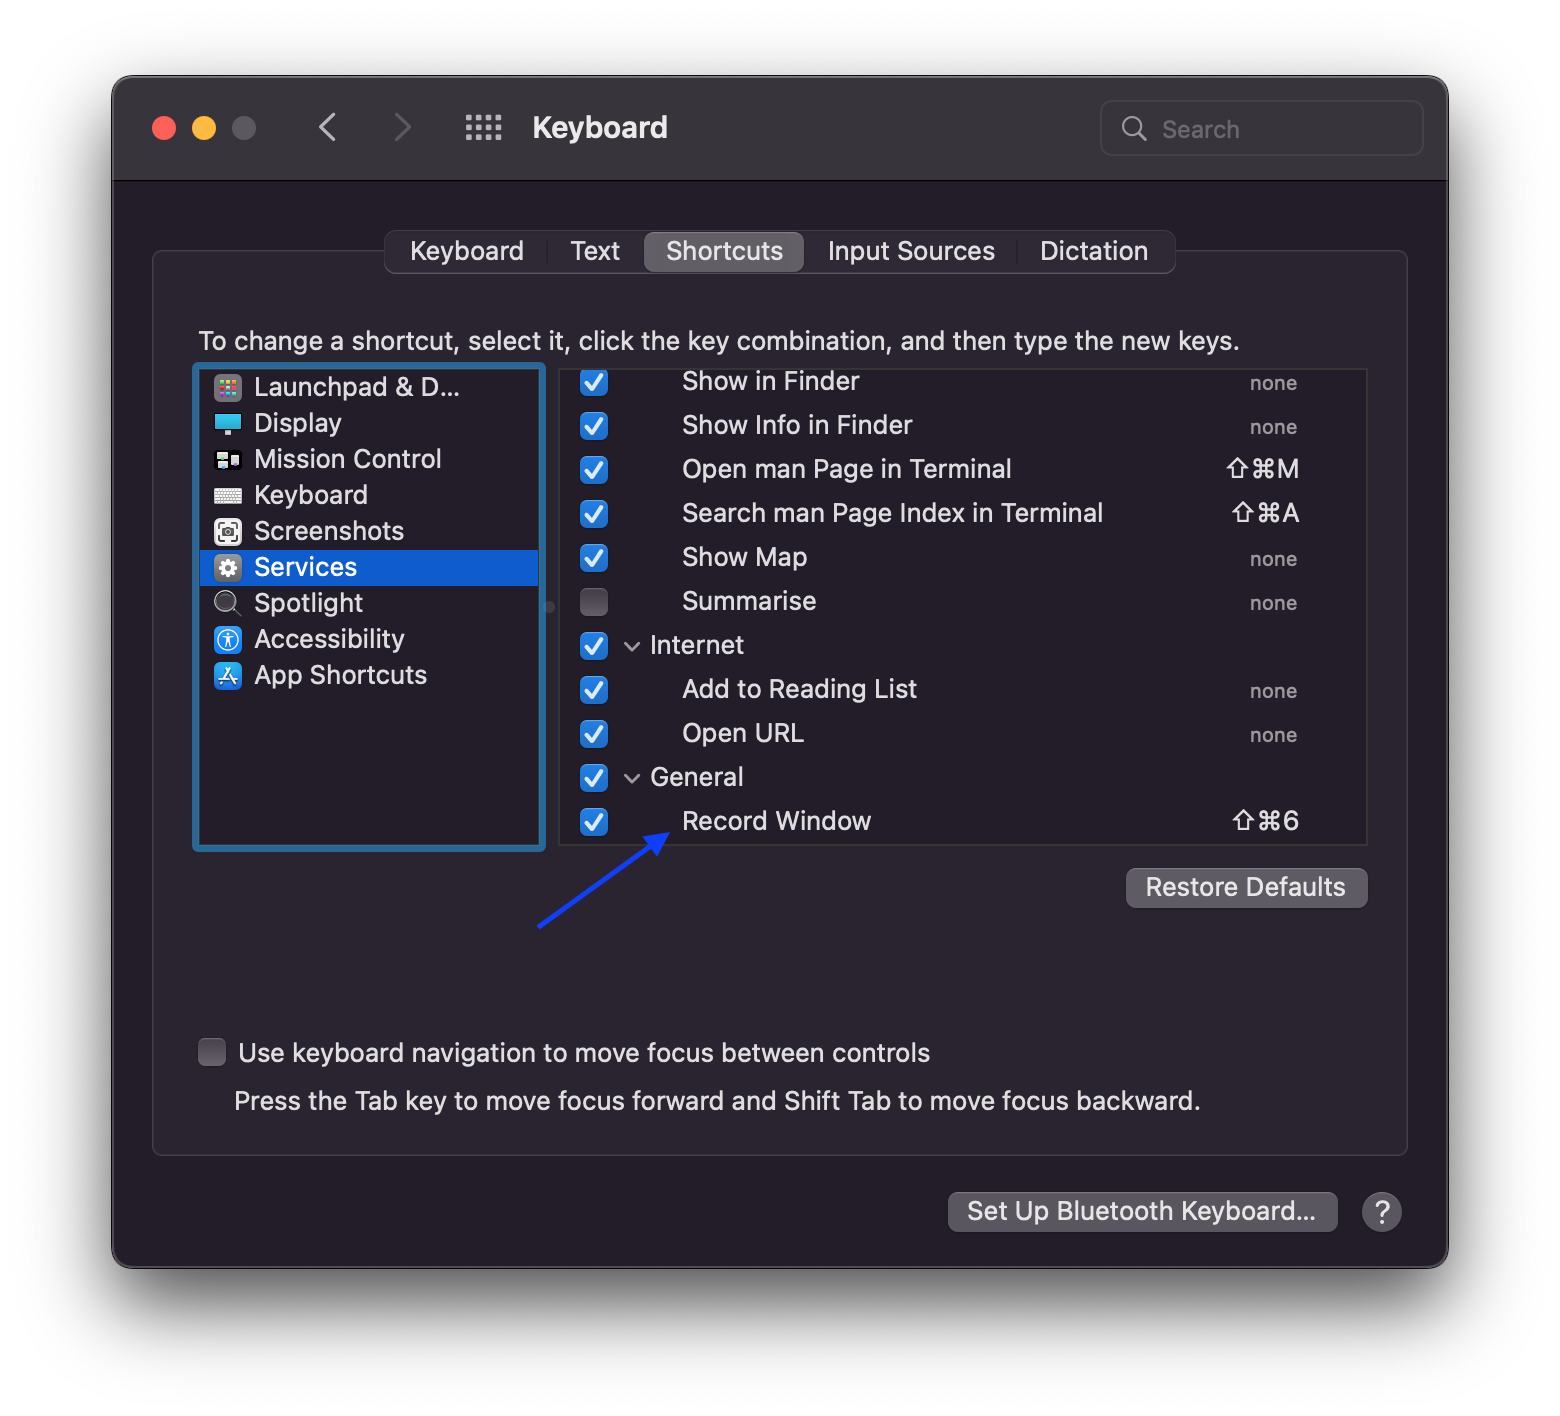 Assign a keyboard shortcut to the Record Window service